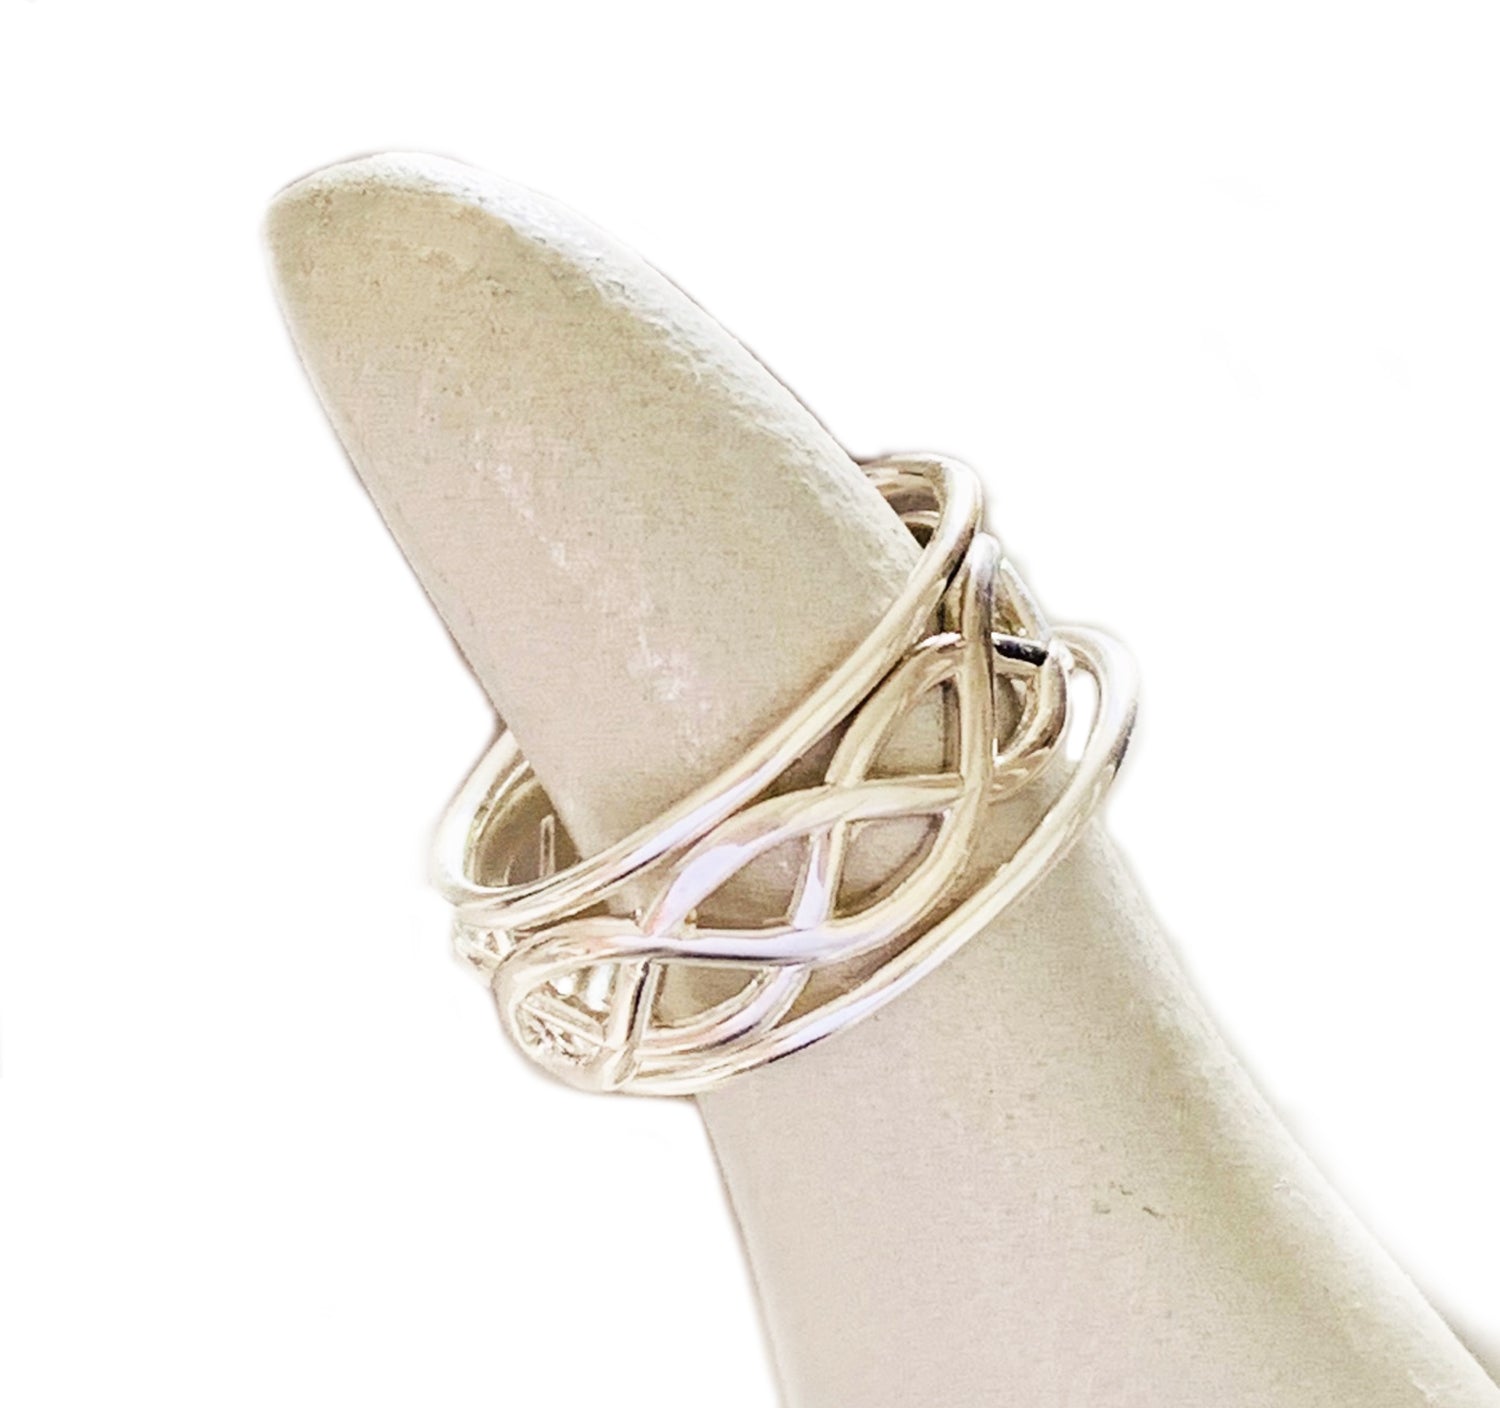 The Deathly Hallows 925 Sterling Silver Ring – Free Spirit